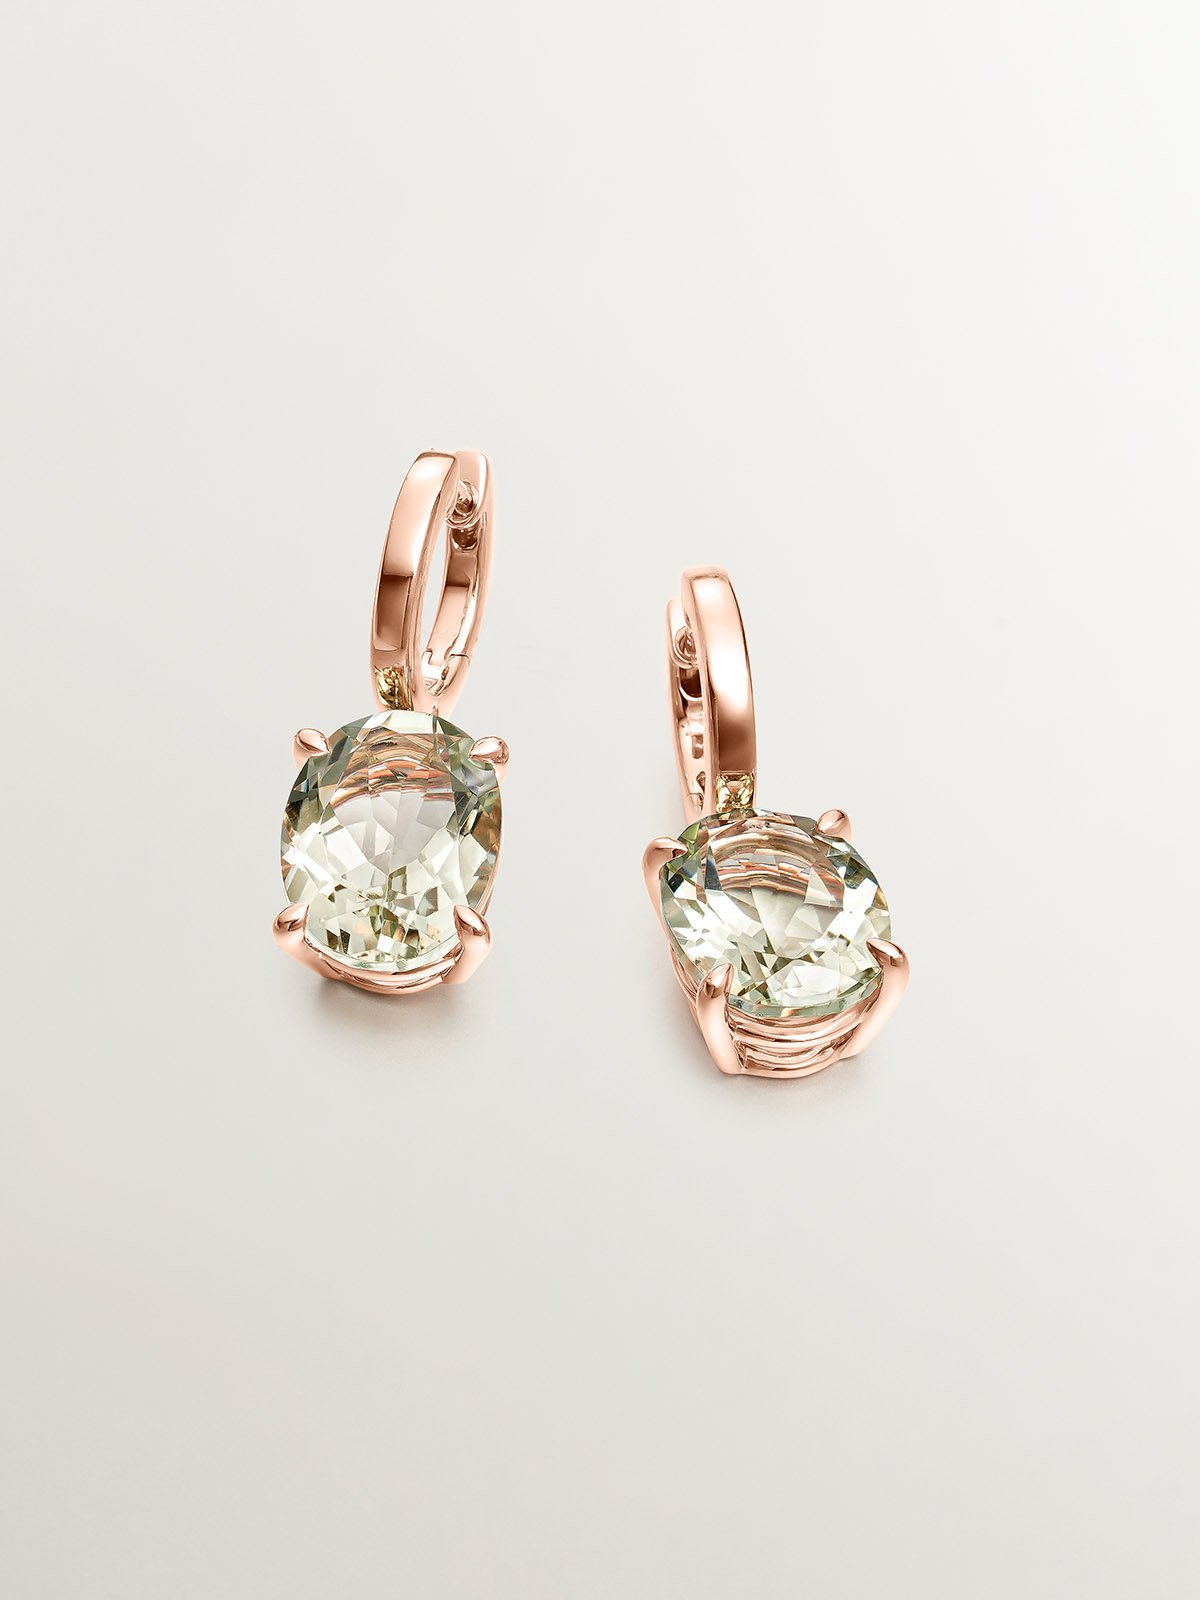 Large hoop earrings made of 925 silver plated in 18K yellow gold with green quartz.